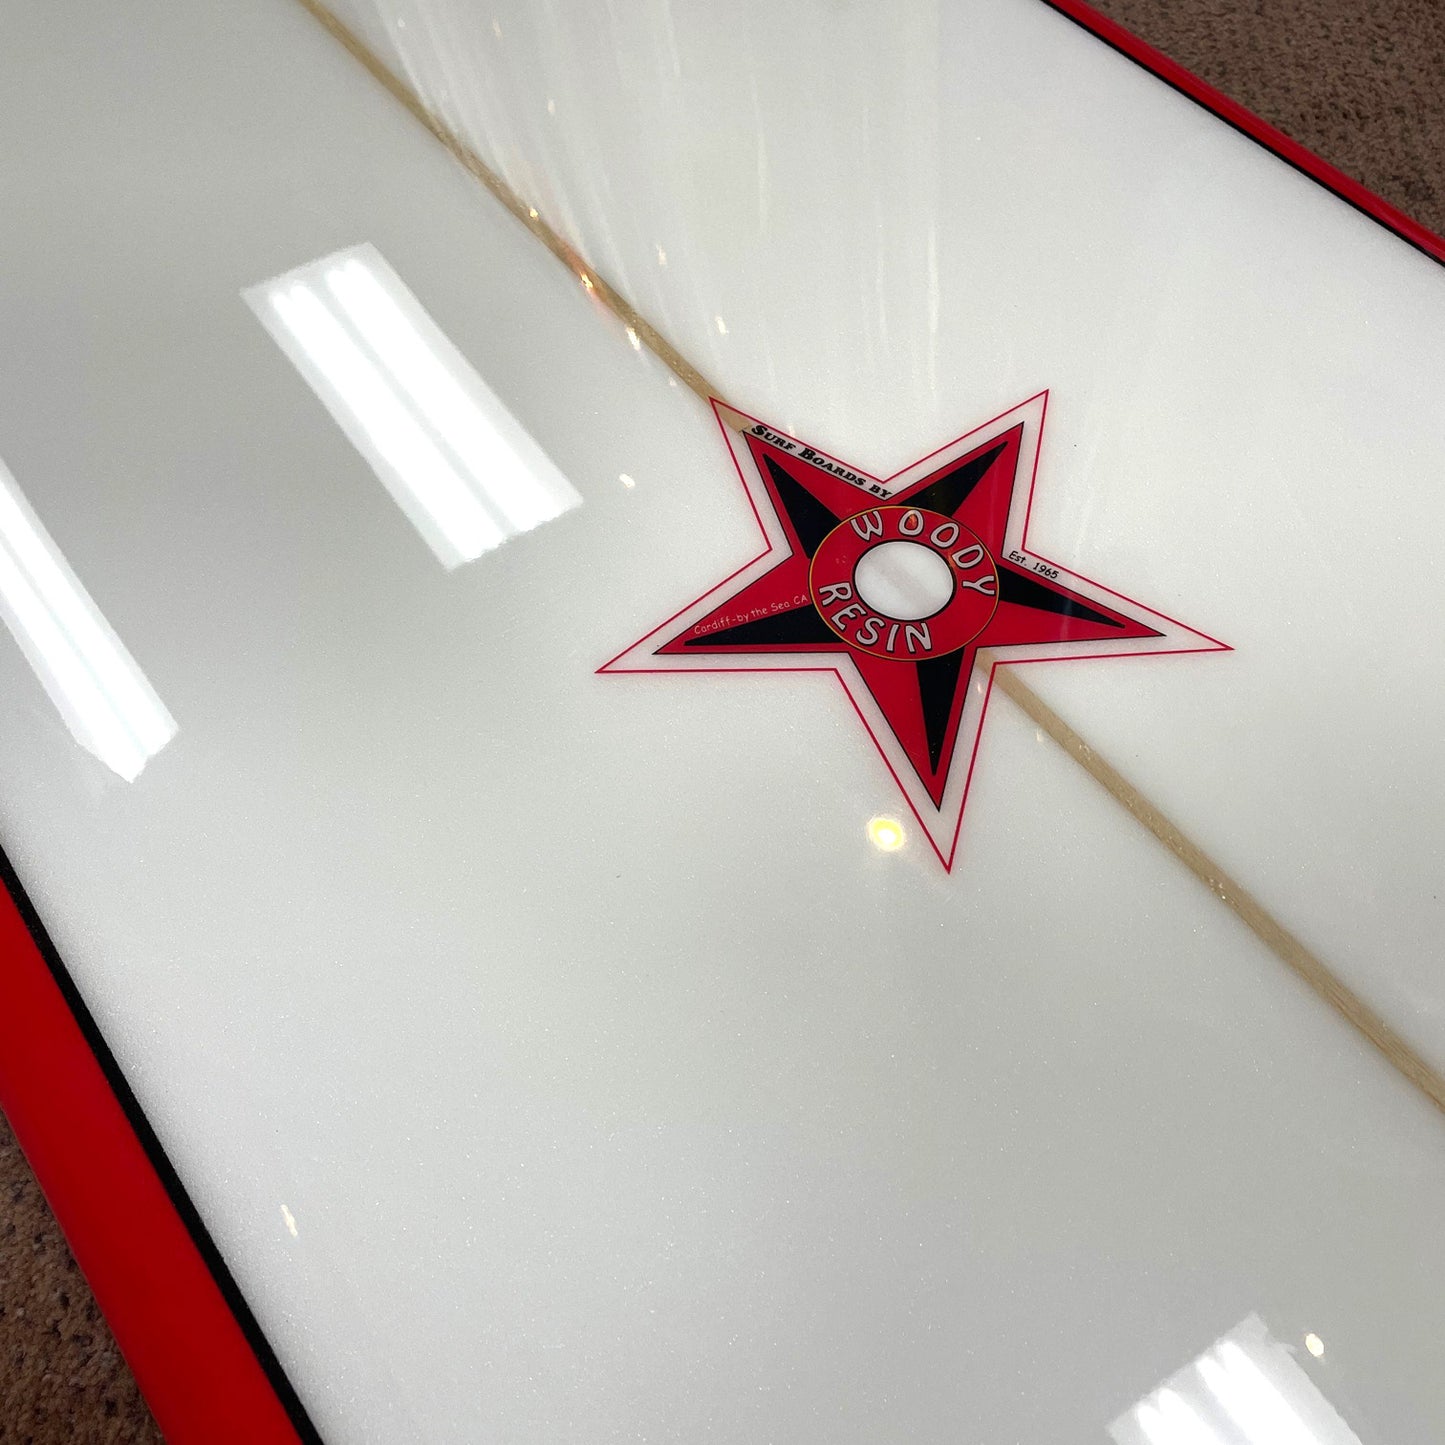 Woody Resin 7'6 Funboard Surfboard, Red